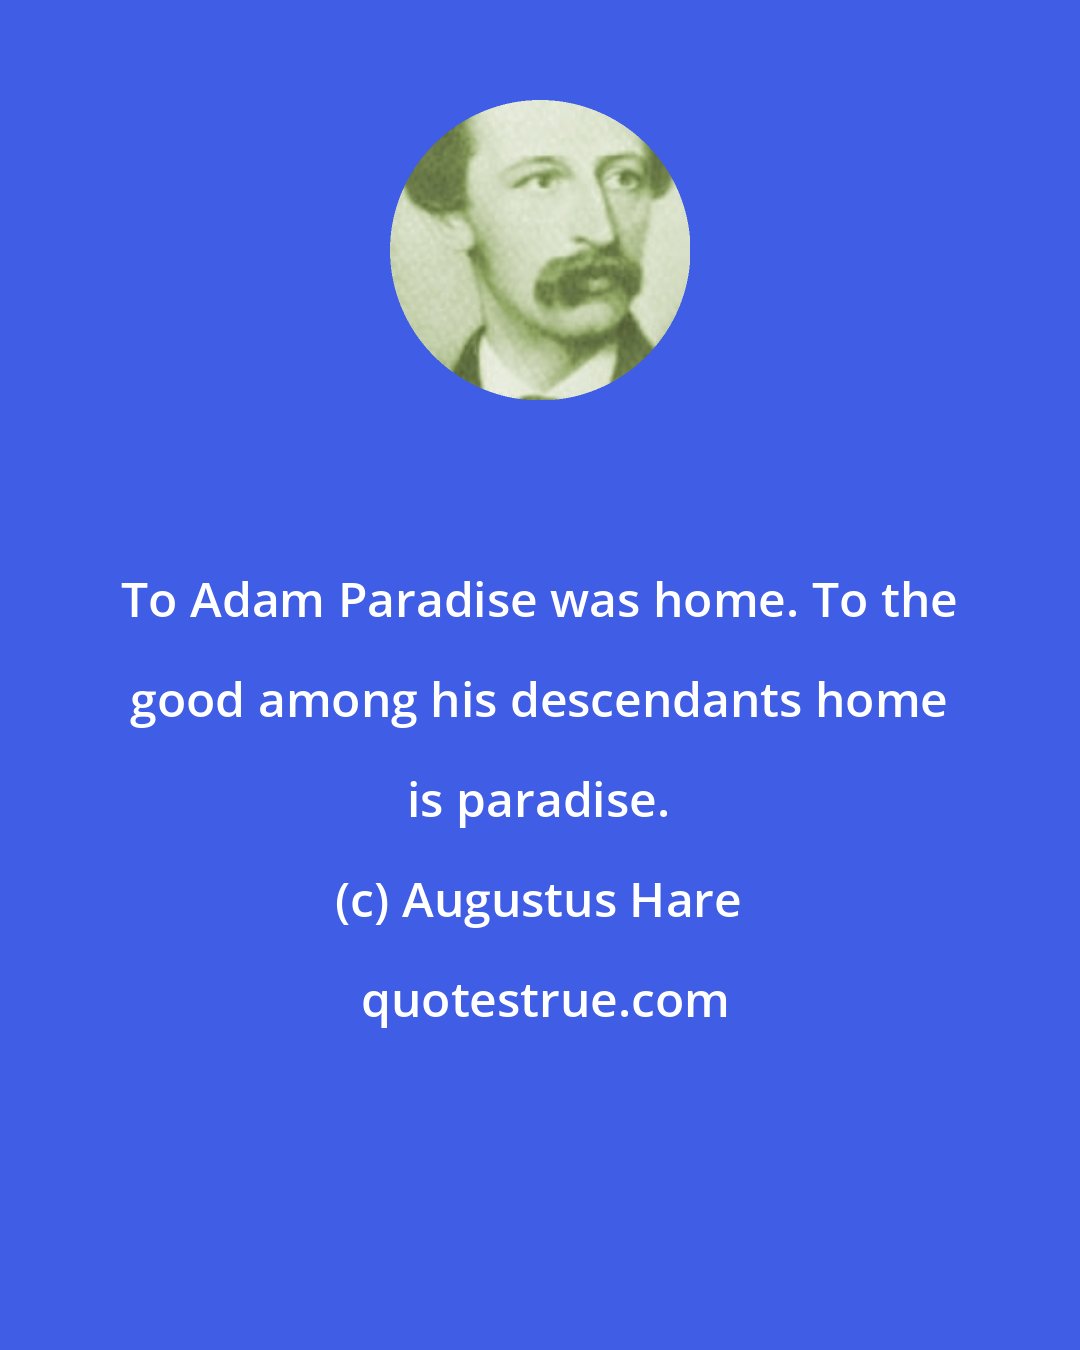 Augustus Hare: To Adam Paradise was home. To the good among his descendants home is paradise.